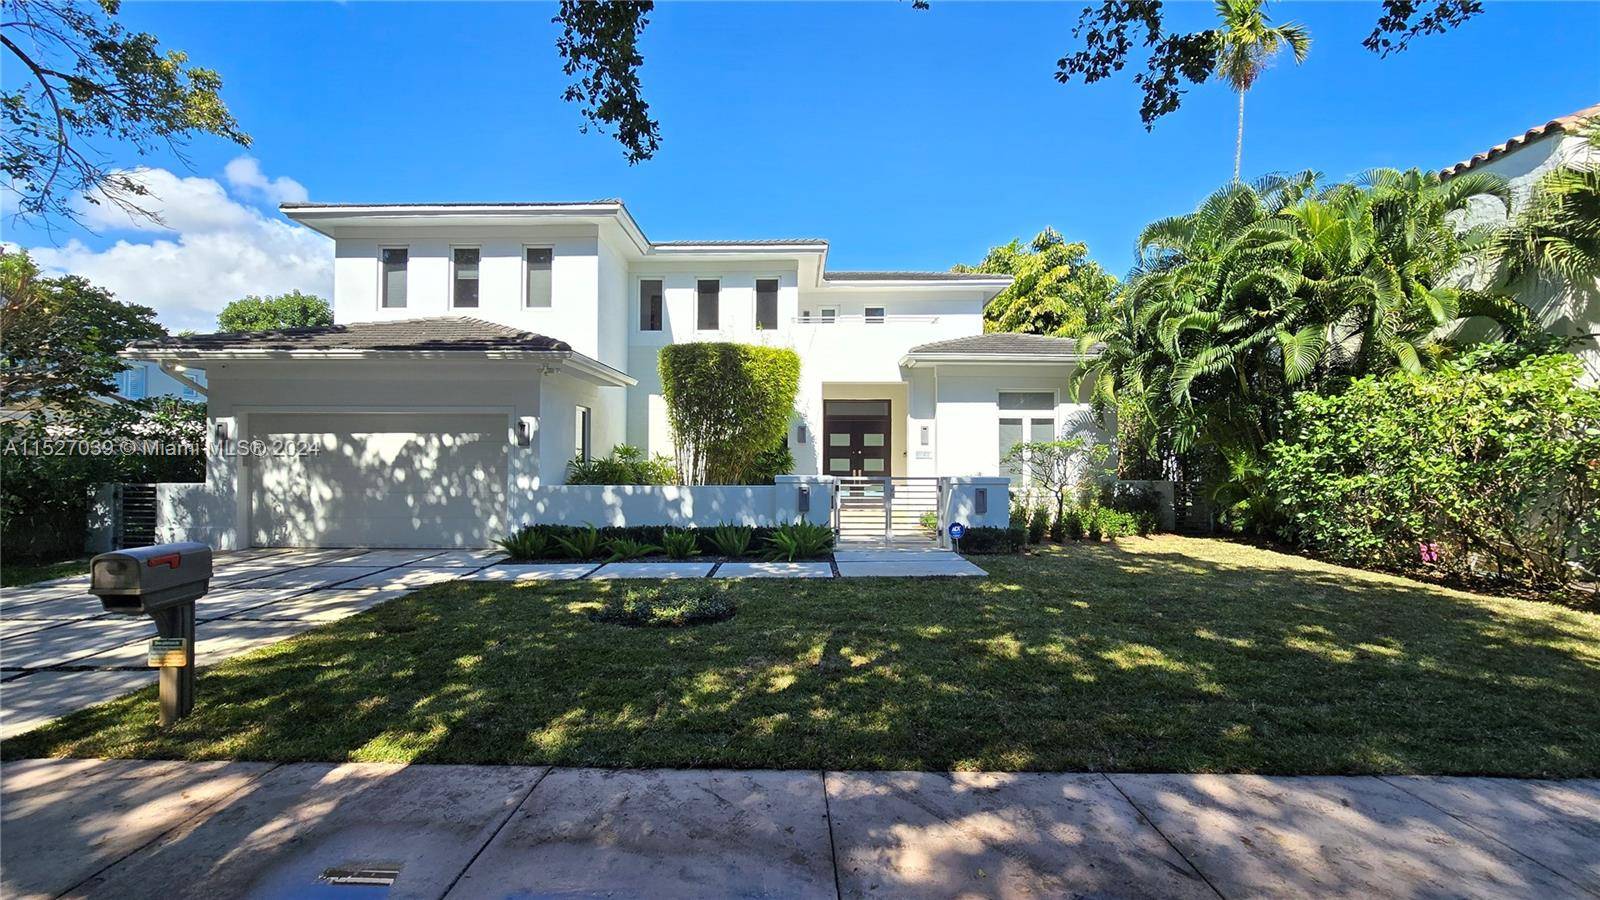 Stunning Coral Gables 2 story dream home built in 2015 boasts five impressive bedrooms, each with its own BA 5 5.